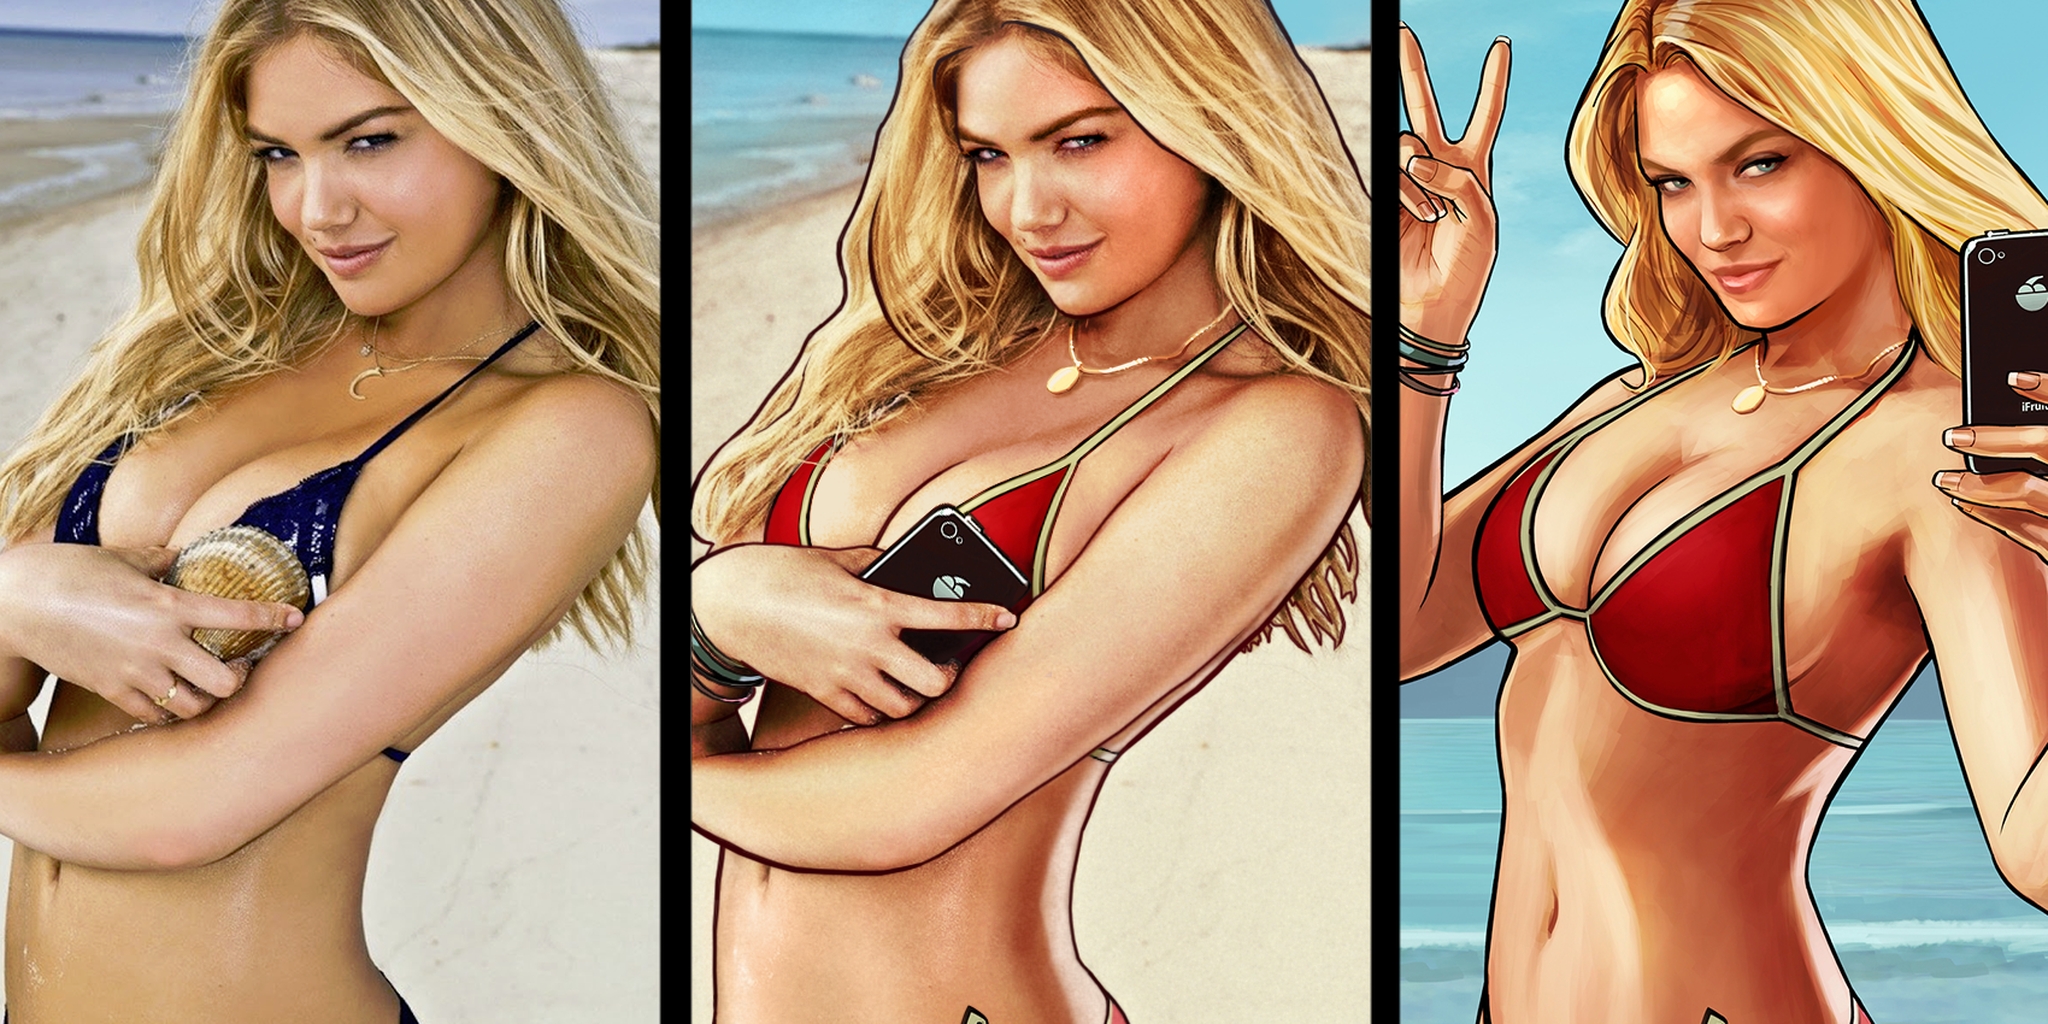 Thats not Kate Upton in the Grand Theft Auto V ads—its this model pic image